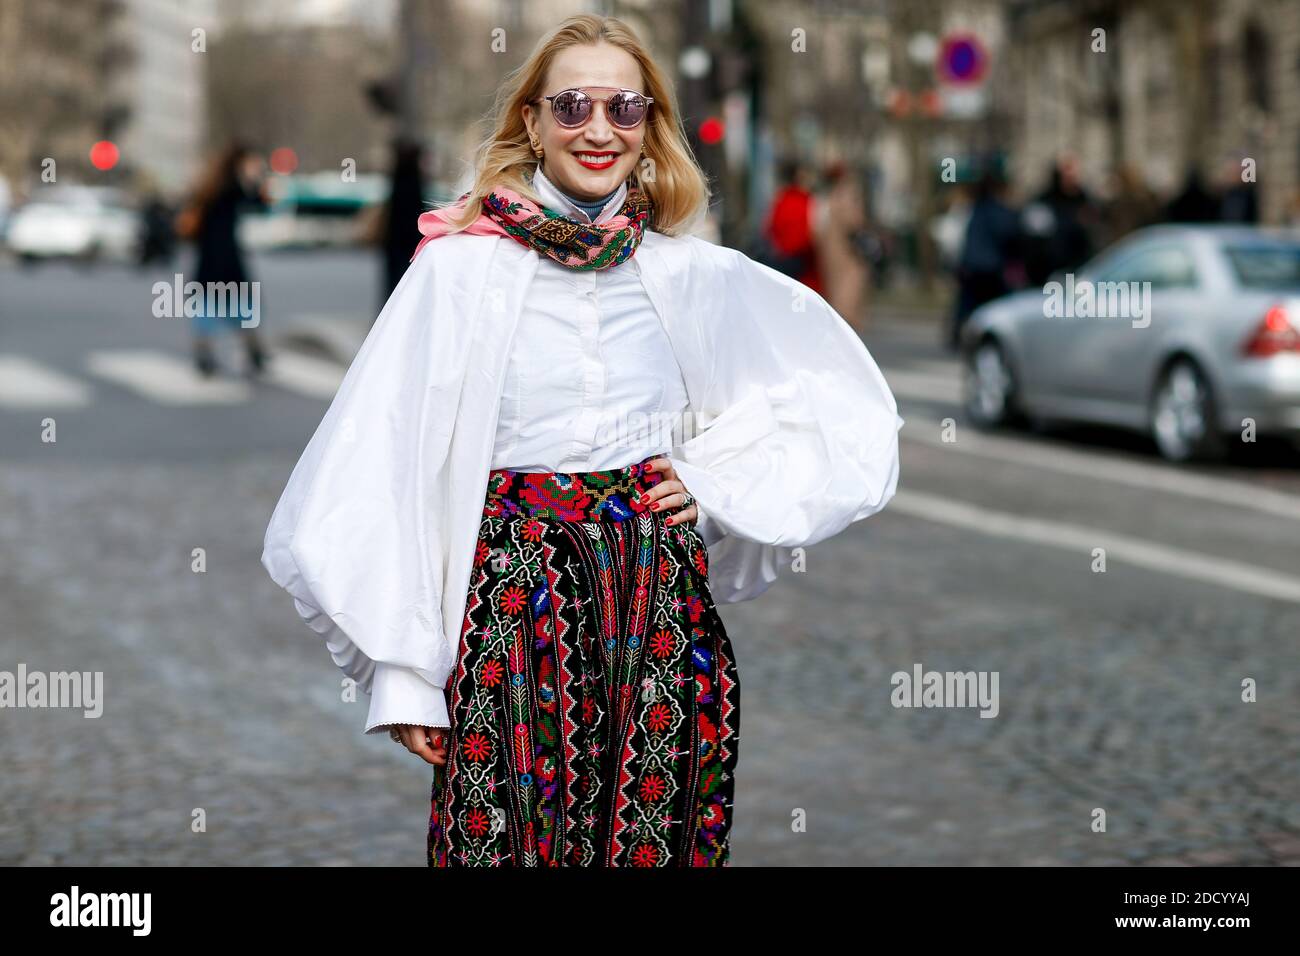 Street style, Oona Chanel arriving at Miu Miu Fall-Winter 2018-2019 show  held at Palais d Iena, in Paris, France, on March 6th, 2018. Photo by  Marie-Paola Bertrand-Hillion/ABACAPRESS.COM Stock Photo - Alamy